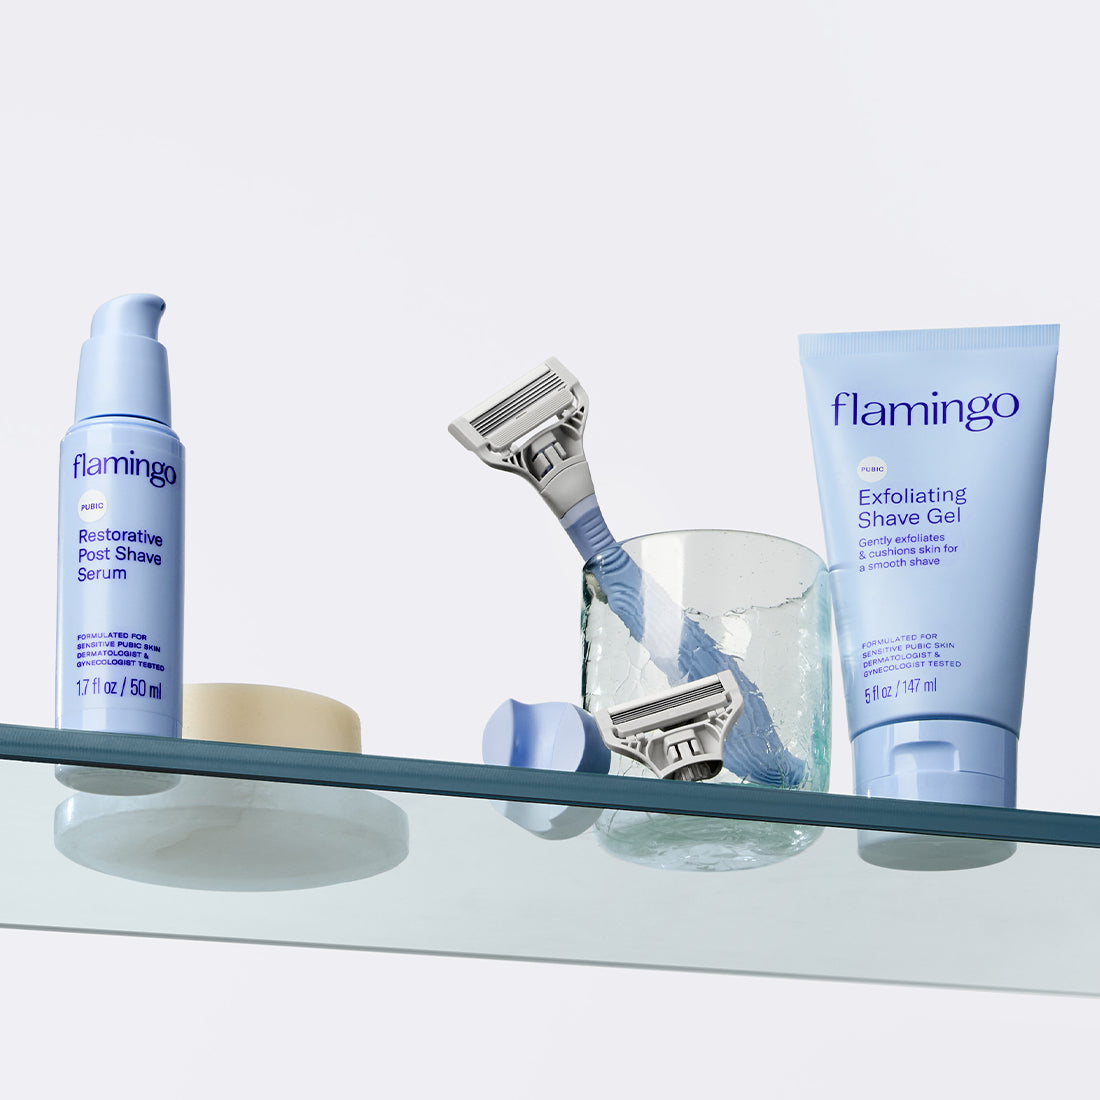 Flamingo's pubic razor, clear shave gel, and post-shave serum pictured on a glass shelf